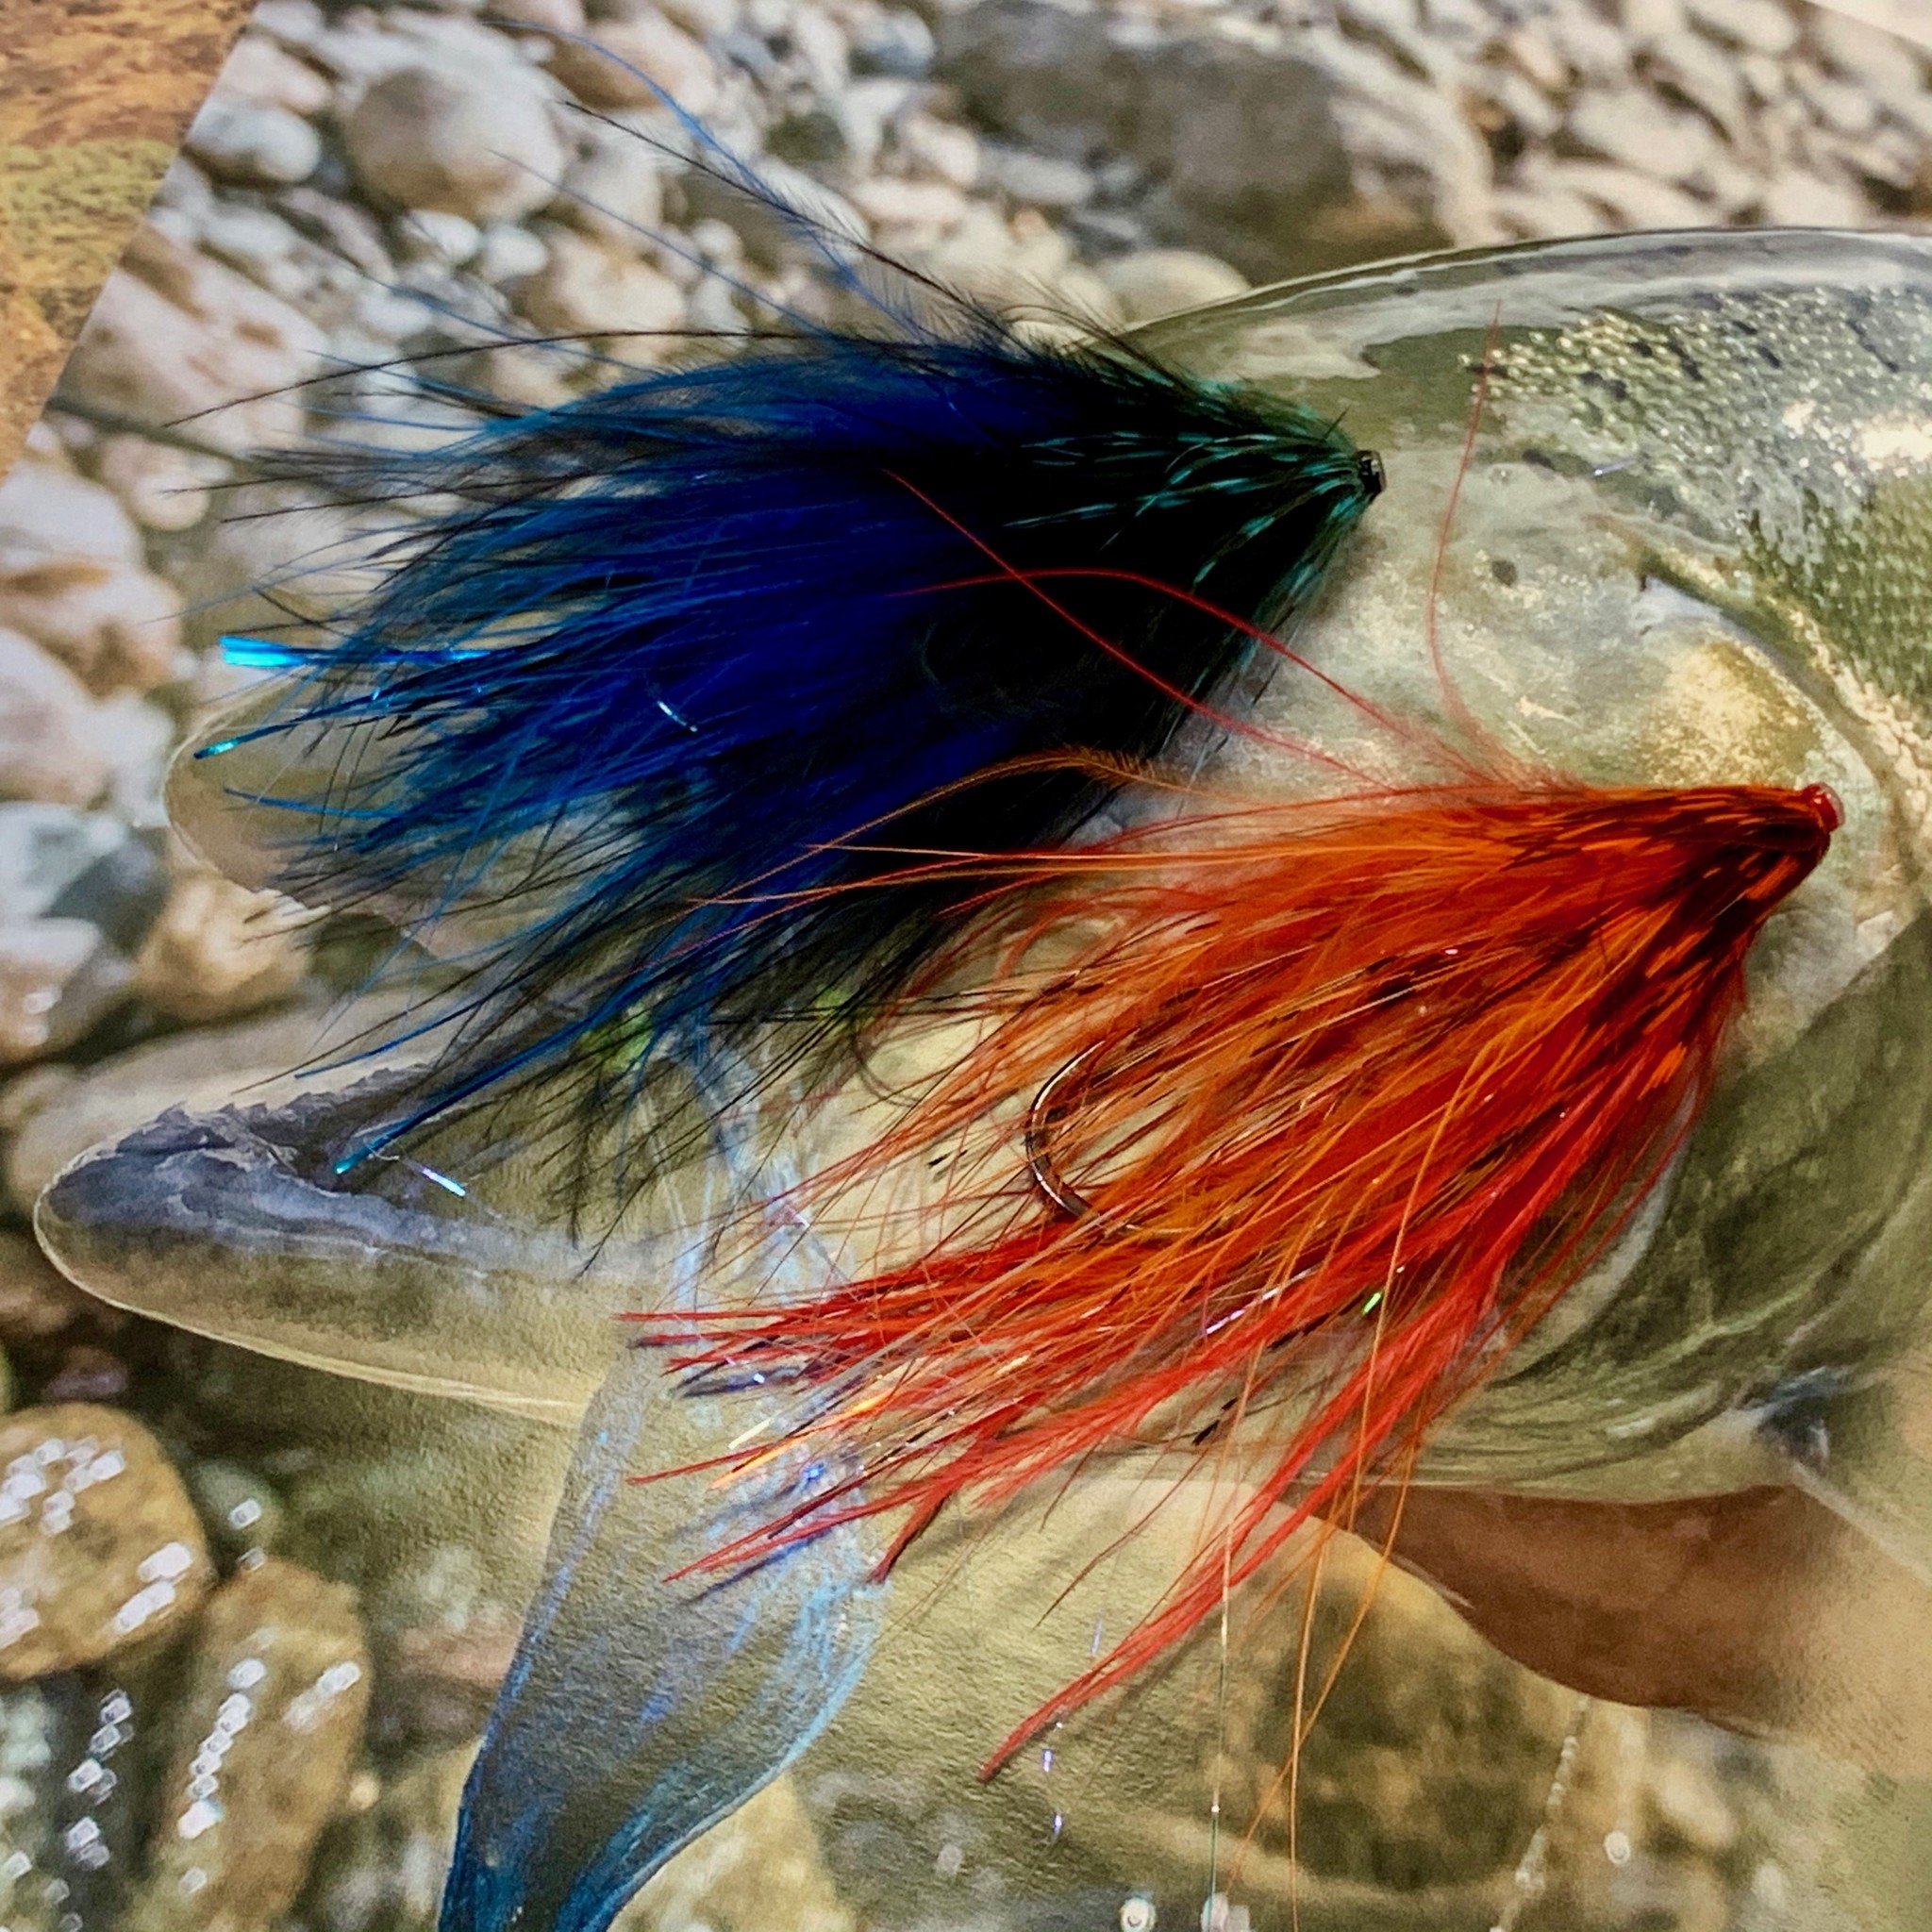 Latest Fly Fishing News and Reports - Choice Overload - Royal Treatment Fly  Fishing